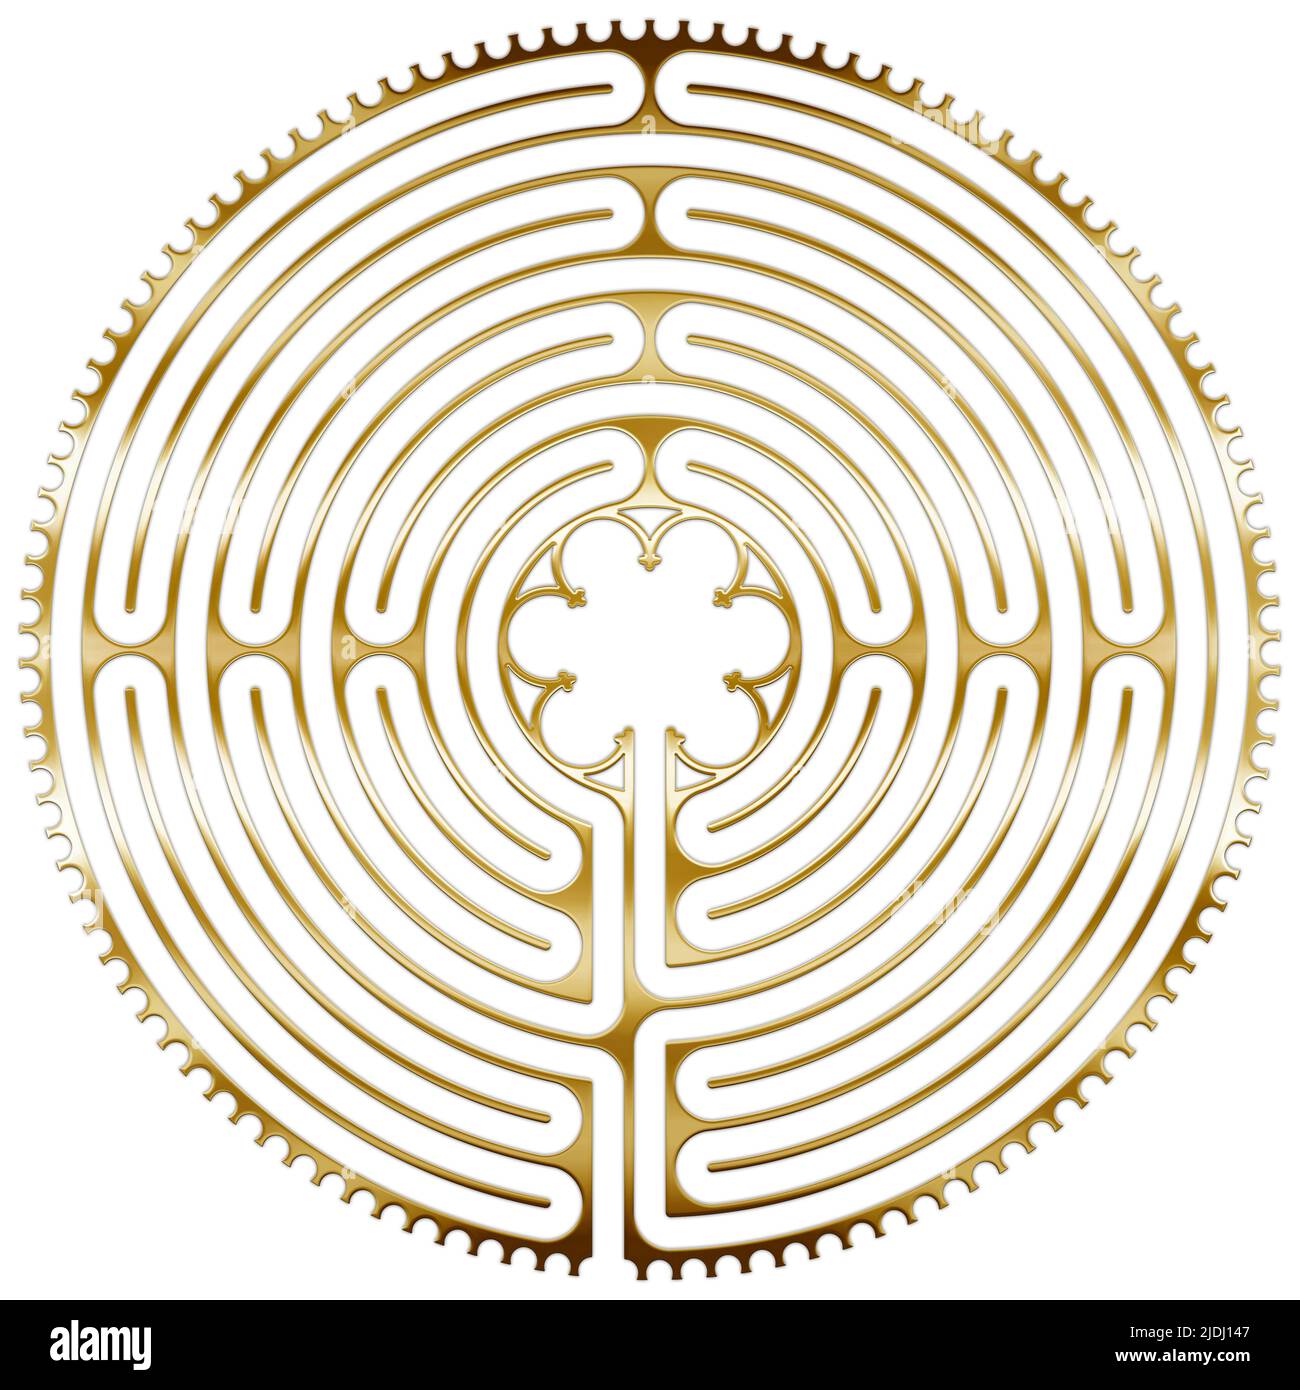 Labyrinth of the cathedral of Chartres, France, illustration on the white background Stock Photo